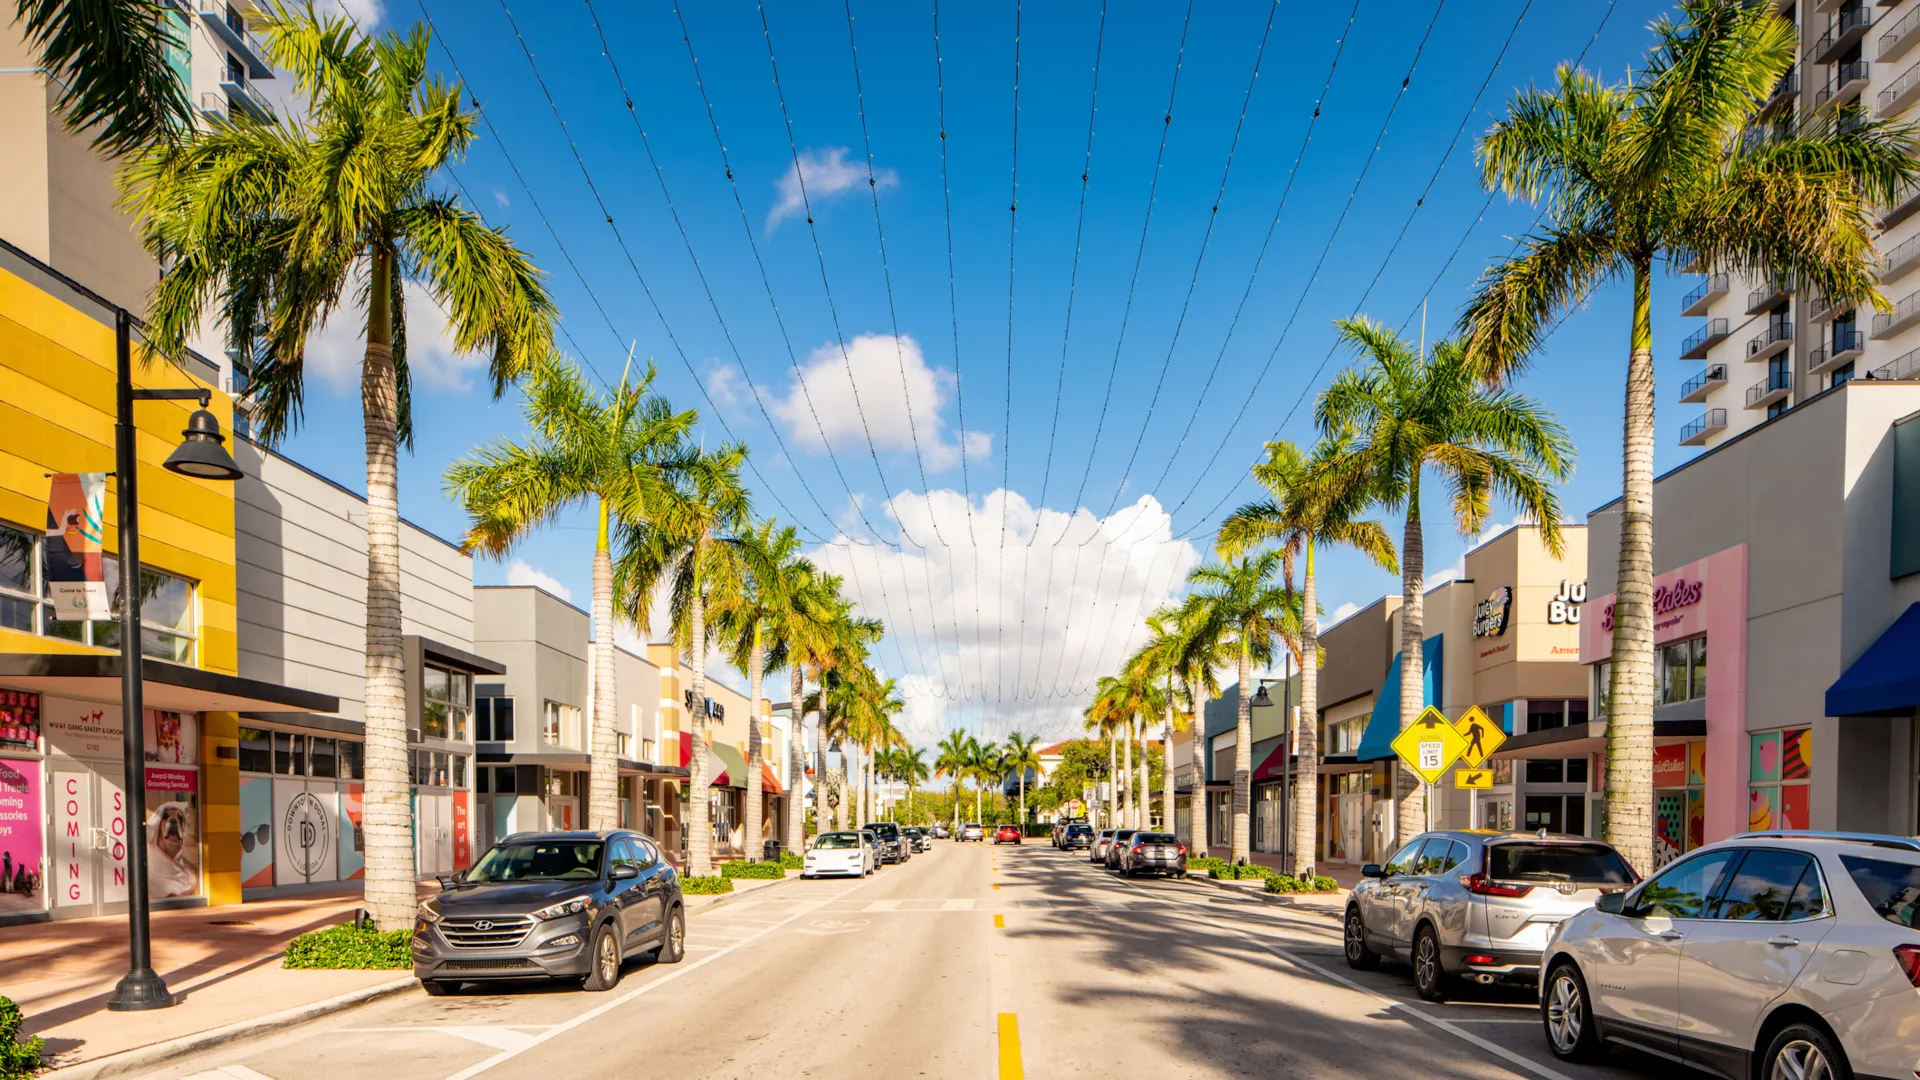 Doral, FL, USA - March 14, 2020: Image of Downtown Doral a growing city in Miami FL.